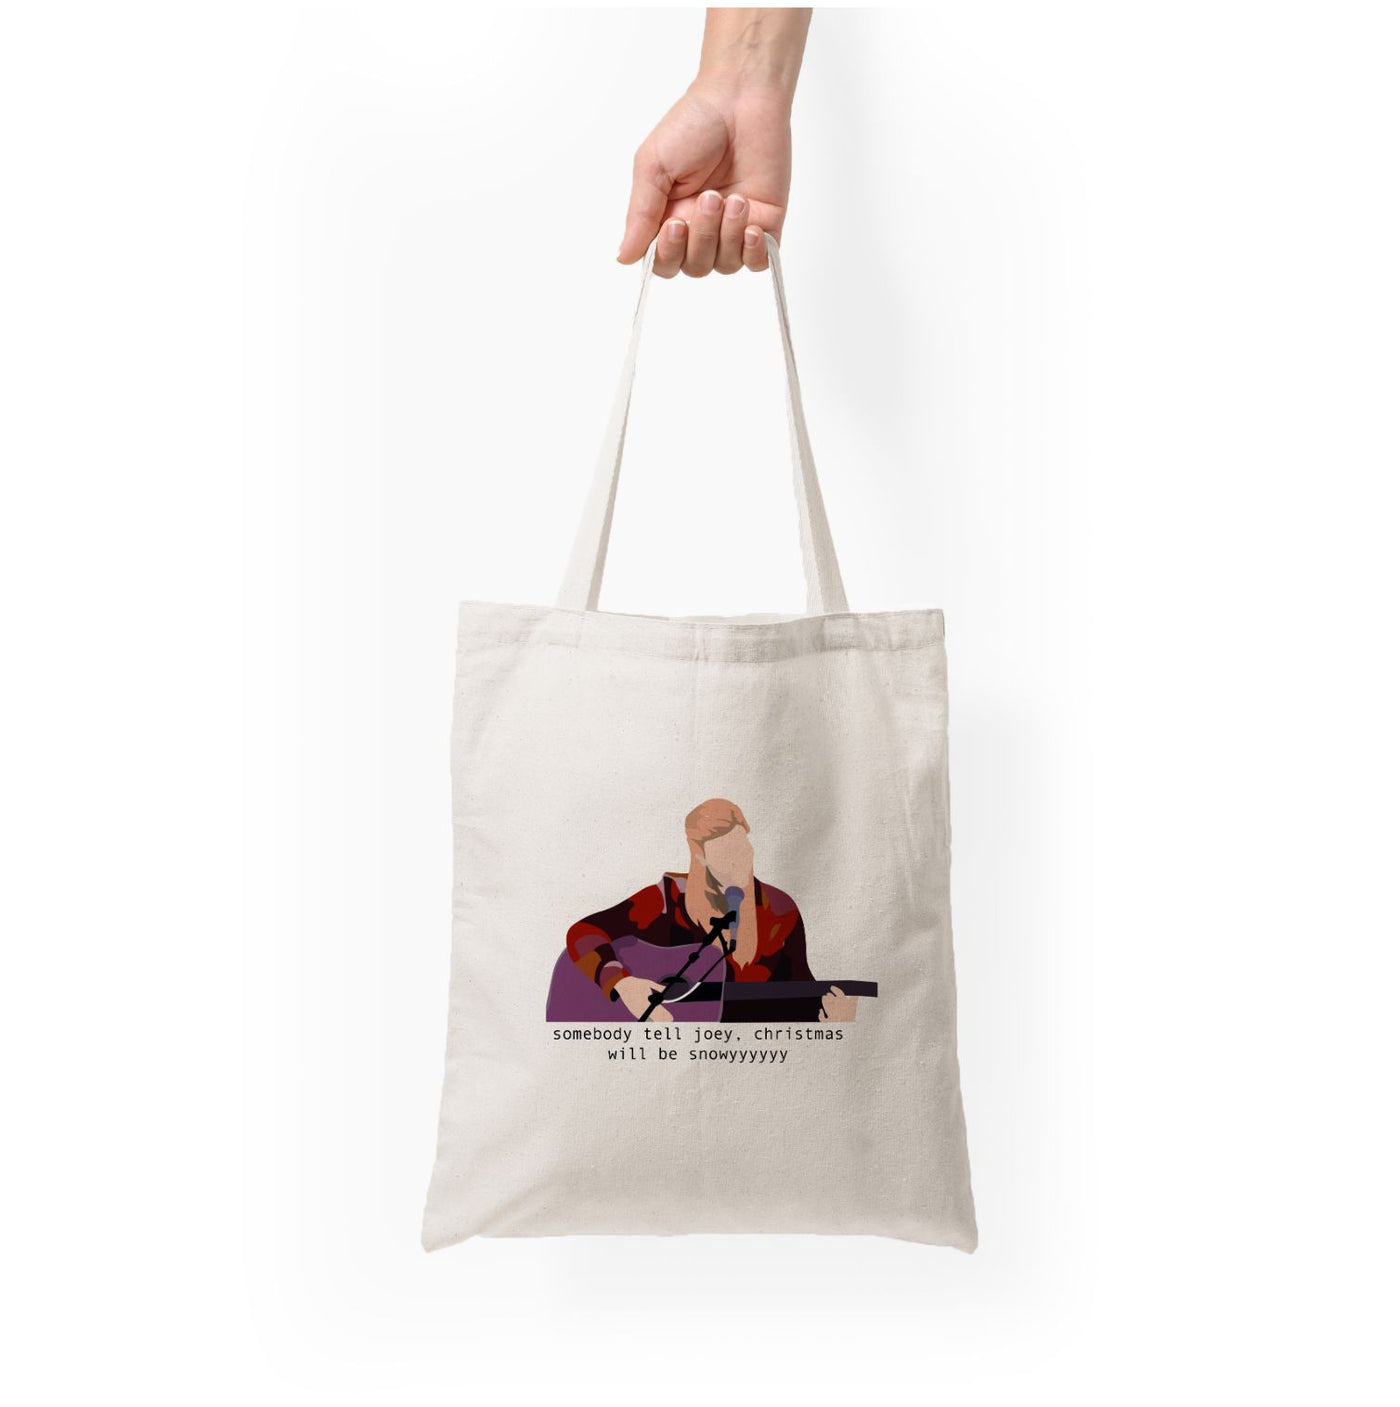 Somebody Tell Joey, Christmas Will Be Snowyyy - Friends Tote Bag